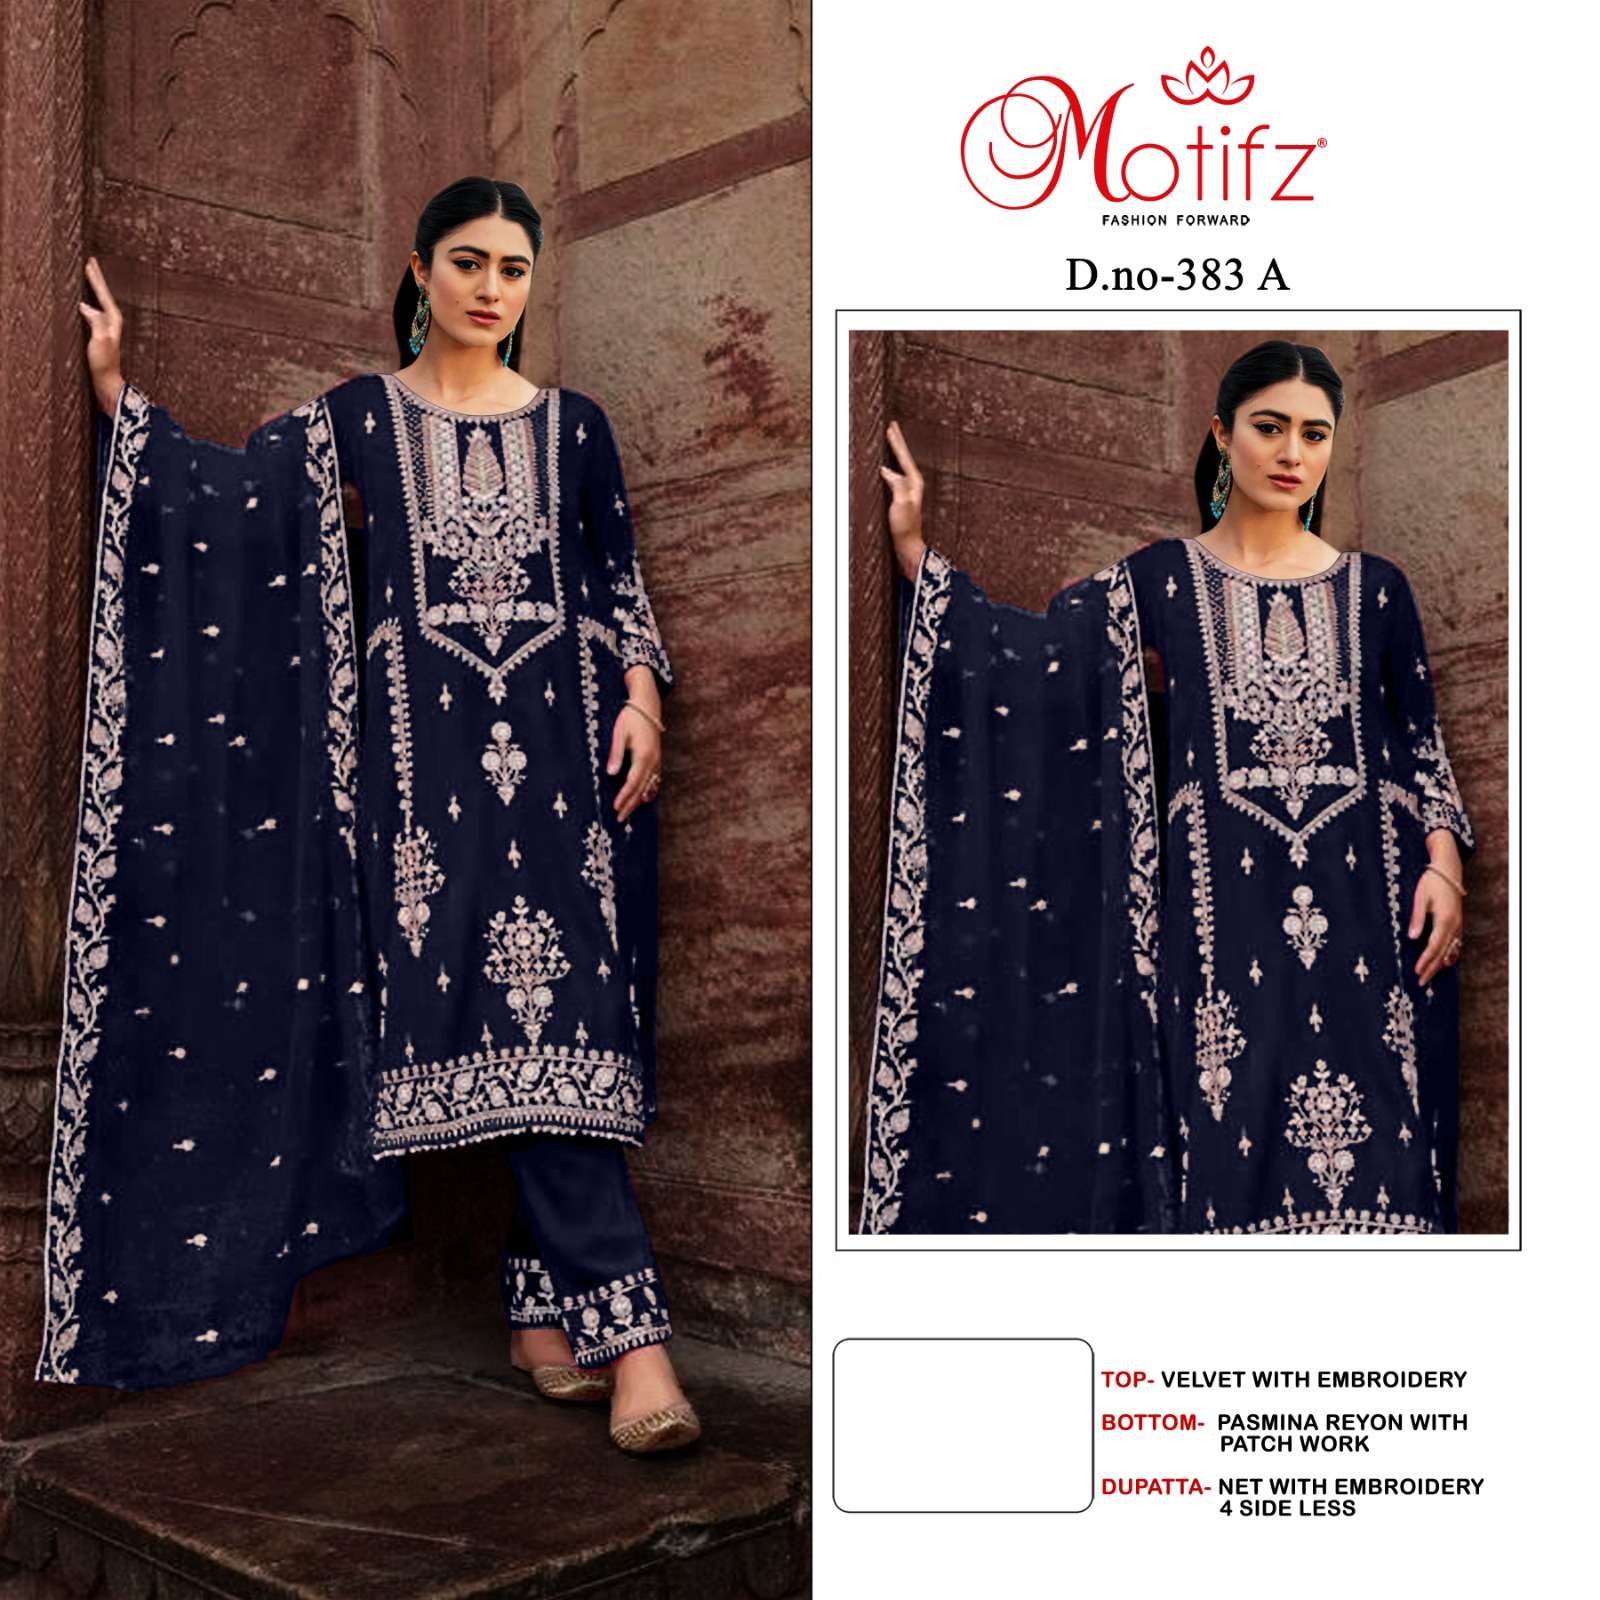 MOTIFZ 383 COLOURS BY MOTIFZ 383-A TO 383-D SERIES VELVET EMBROIDERY DRESSES